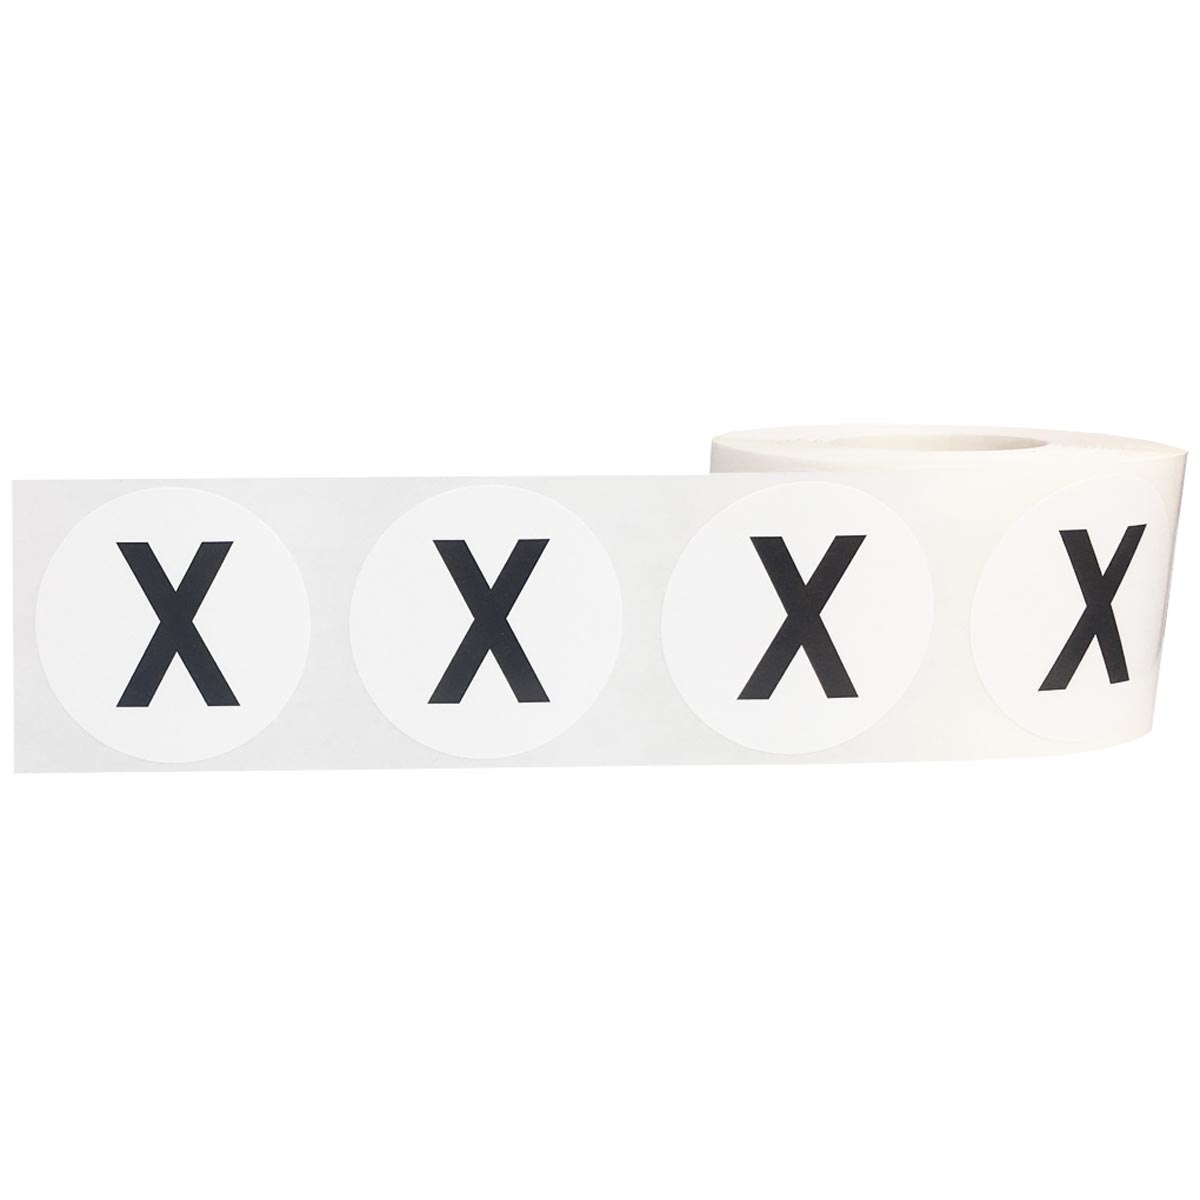 Large Letter X Stickers 1.5 Round